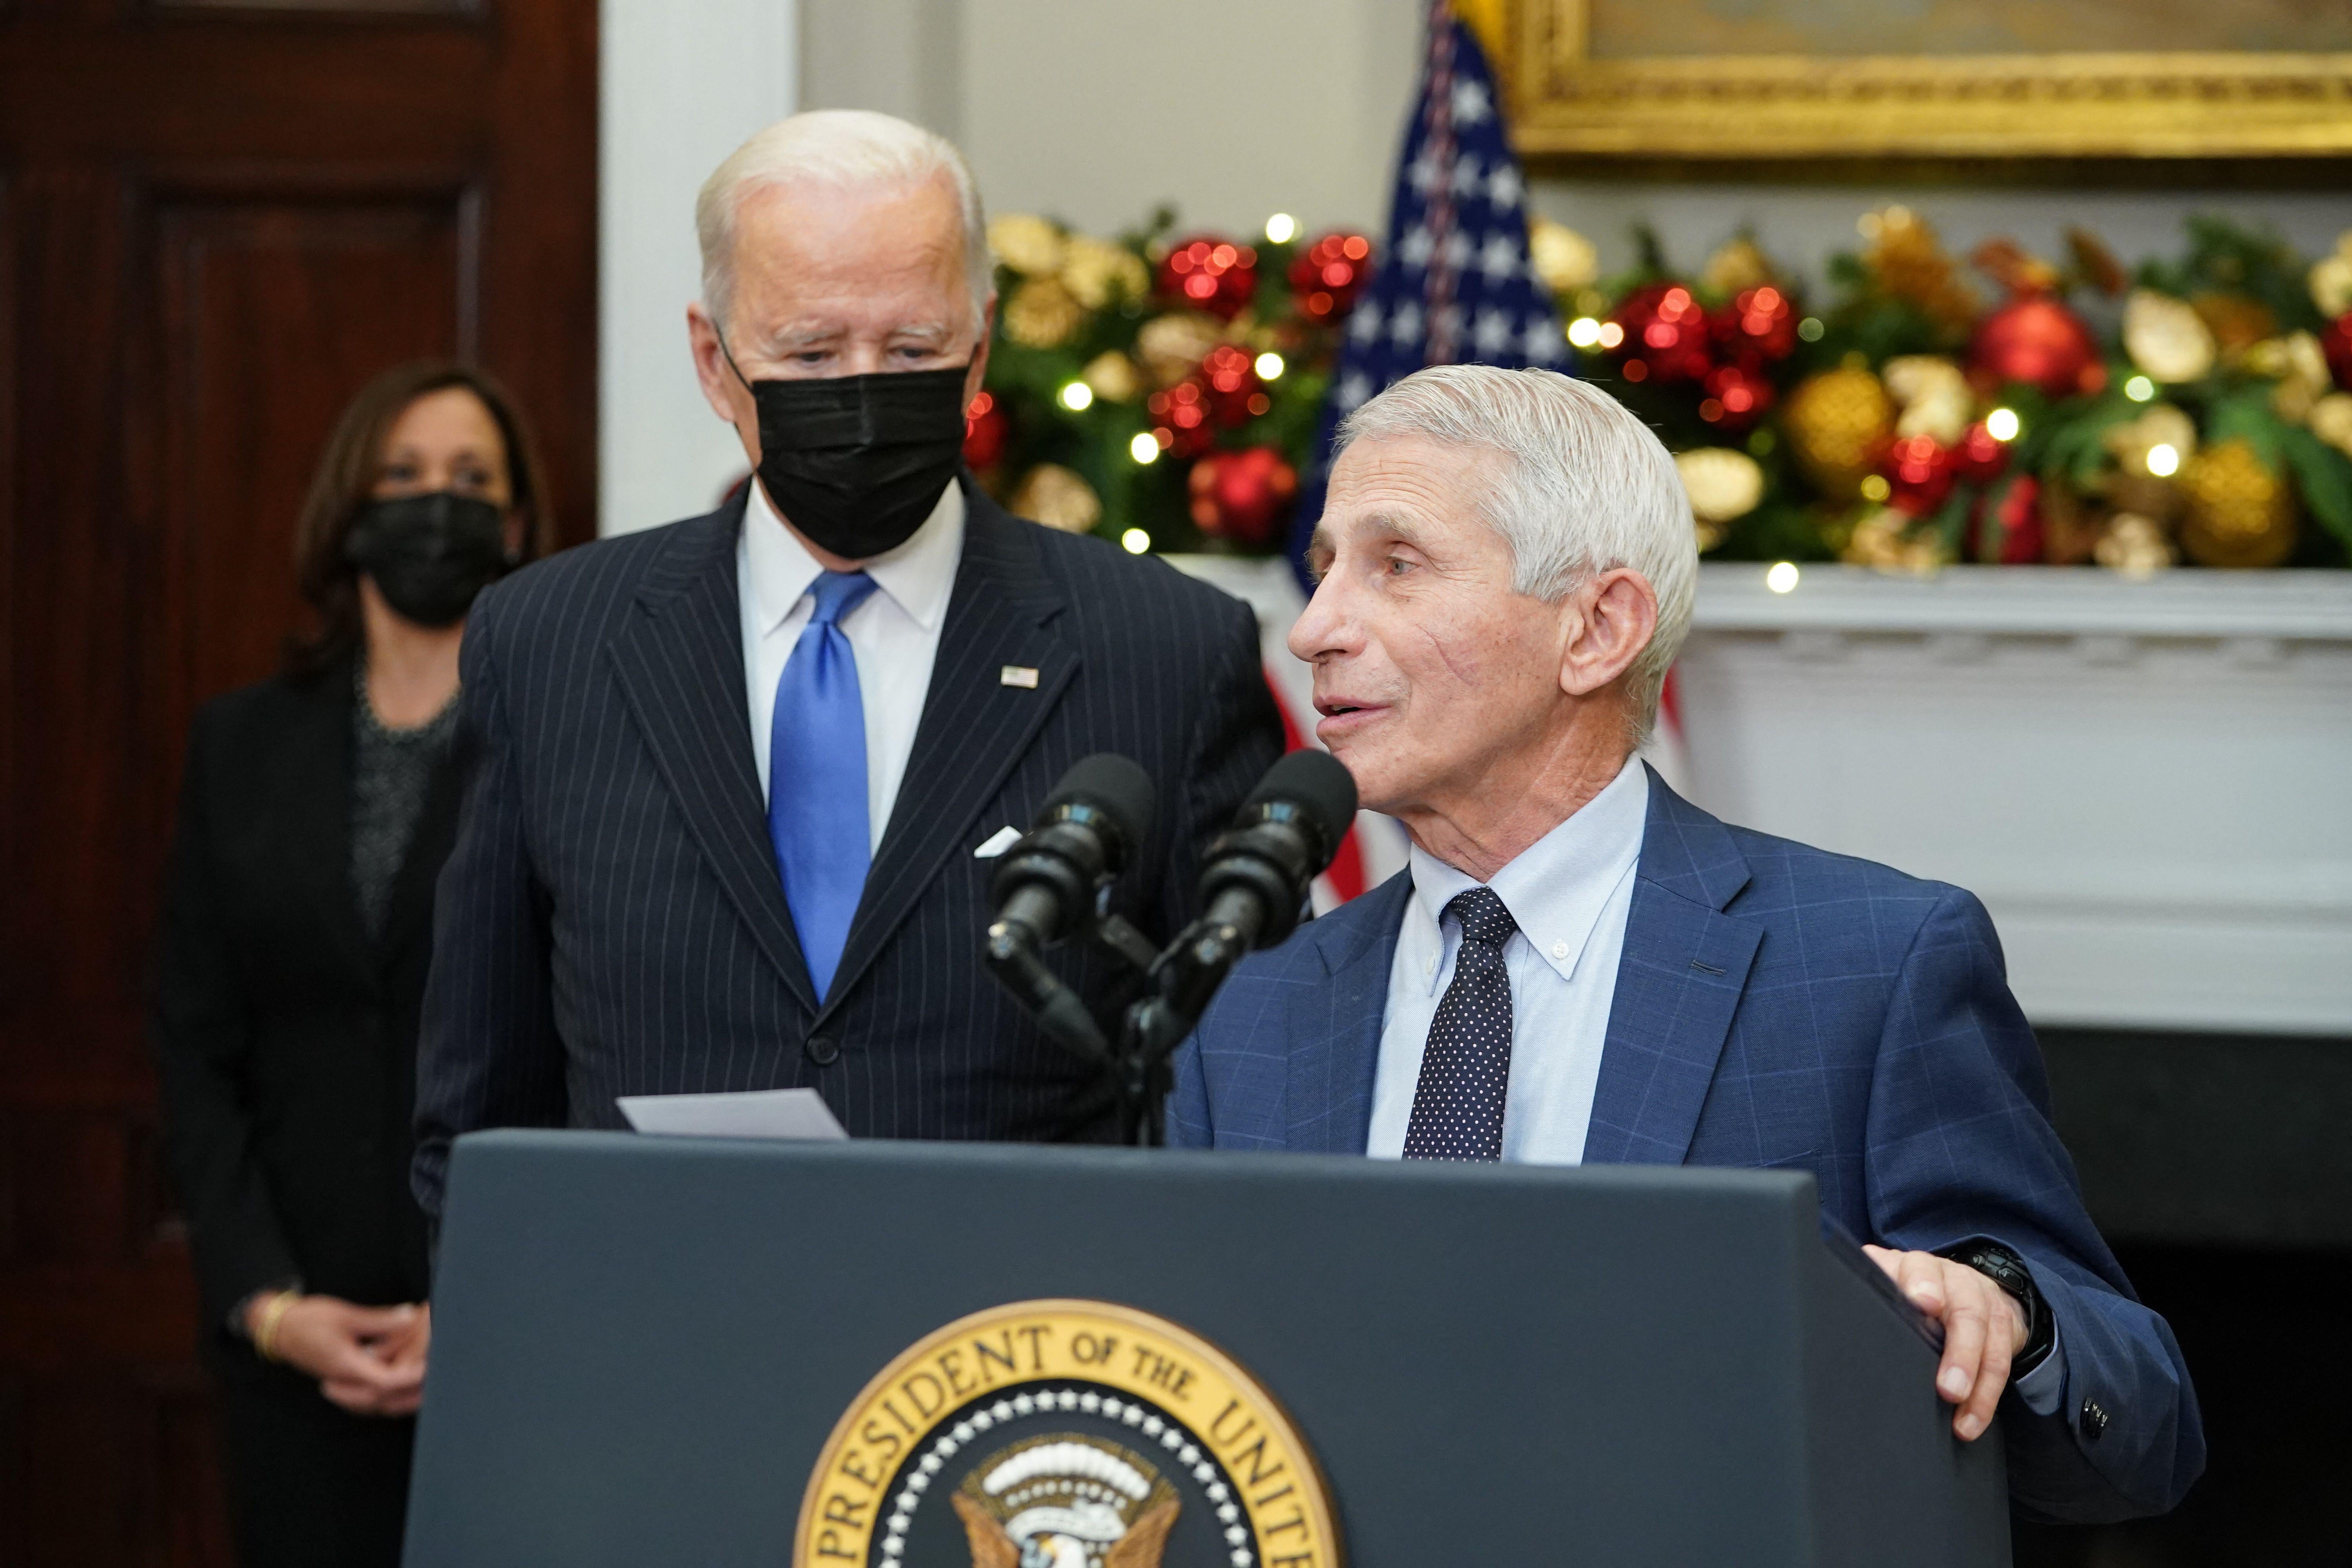 Fauci speaks at a podium with Biden and Harris behind him